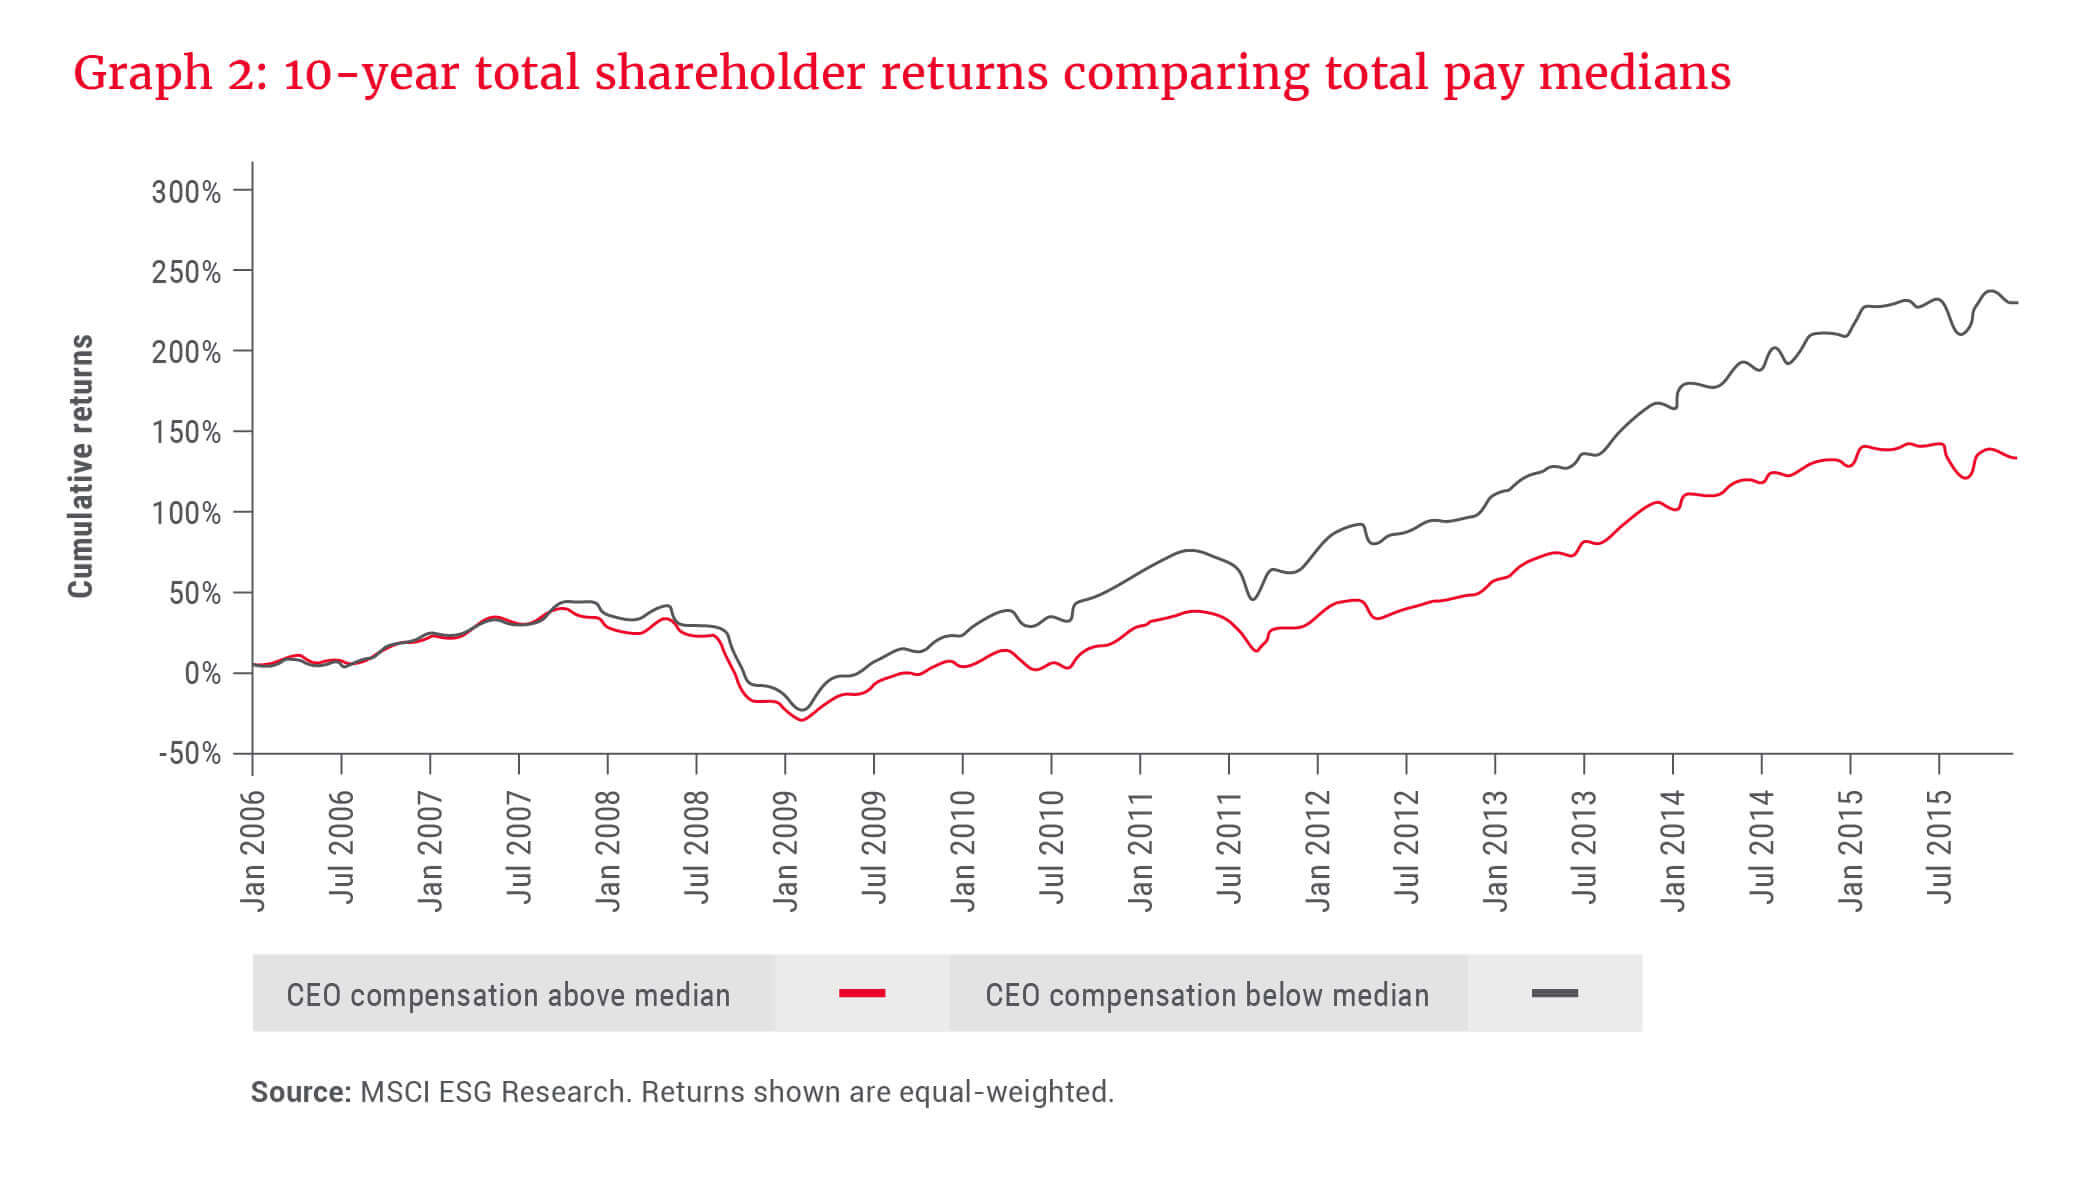 10-year total shareholder returns comparing total pay medians - Allan Gray